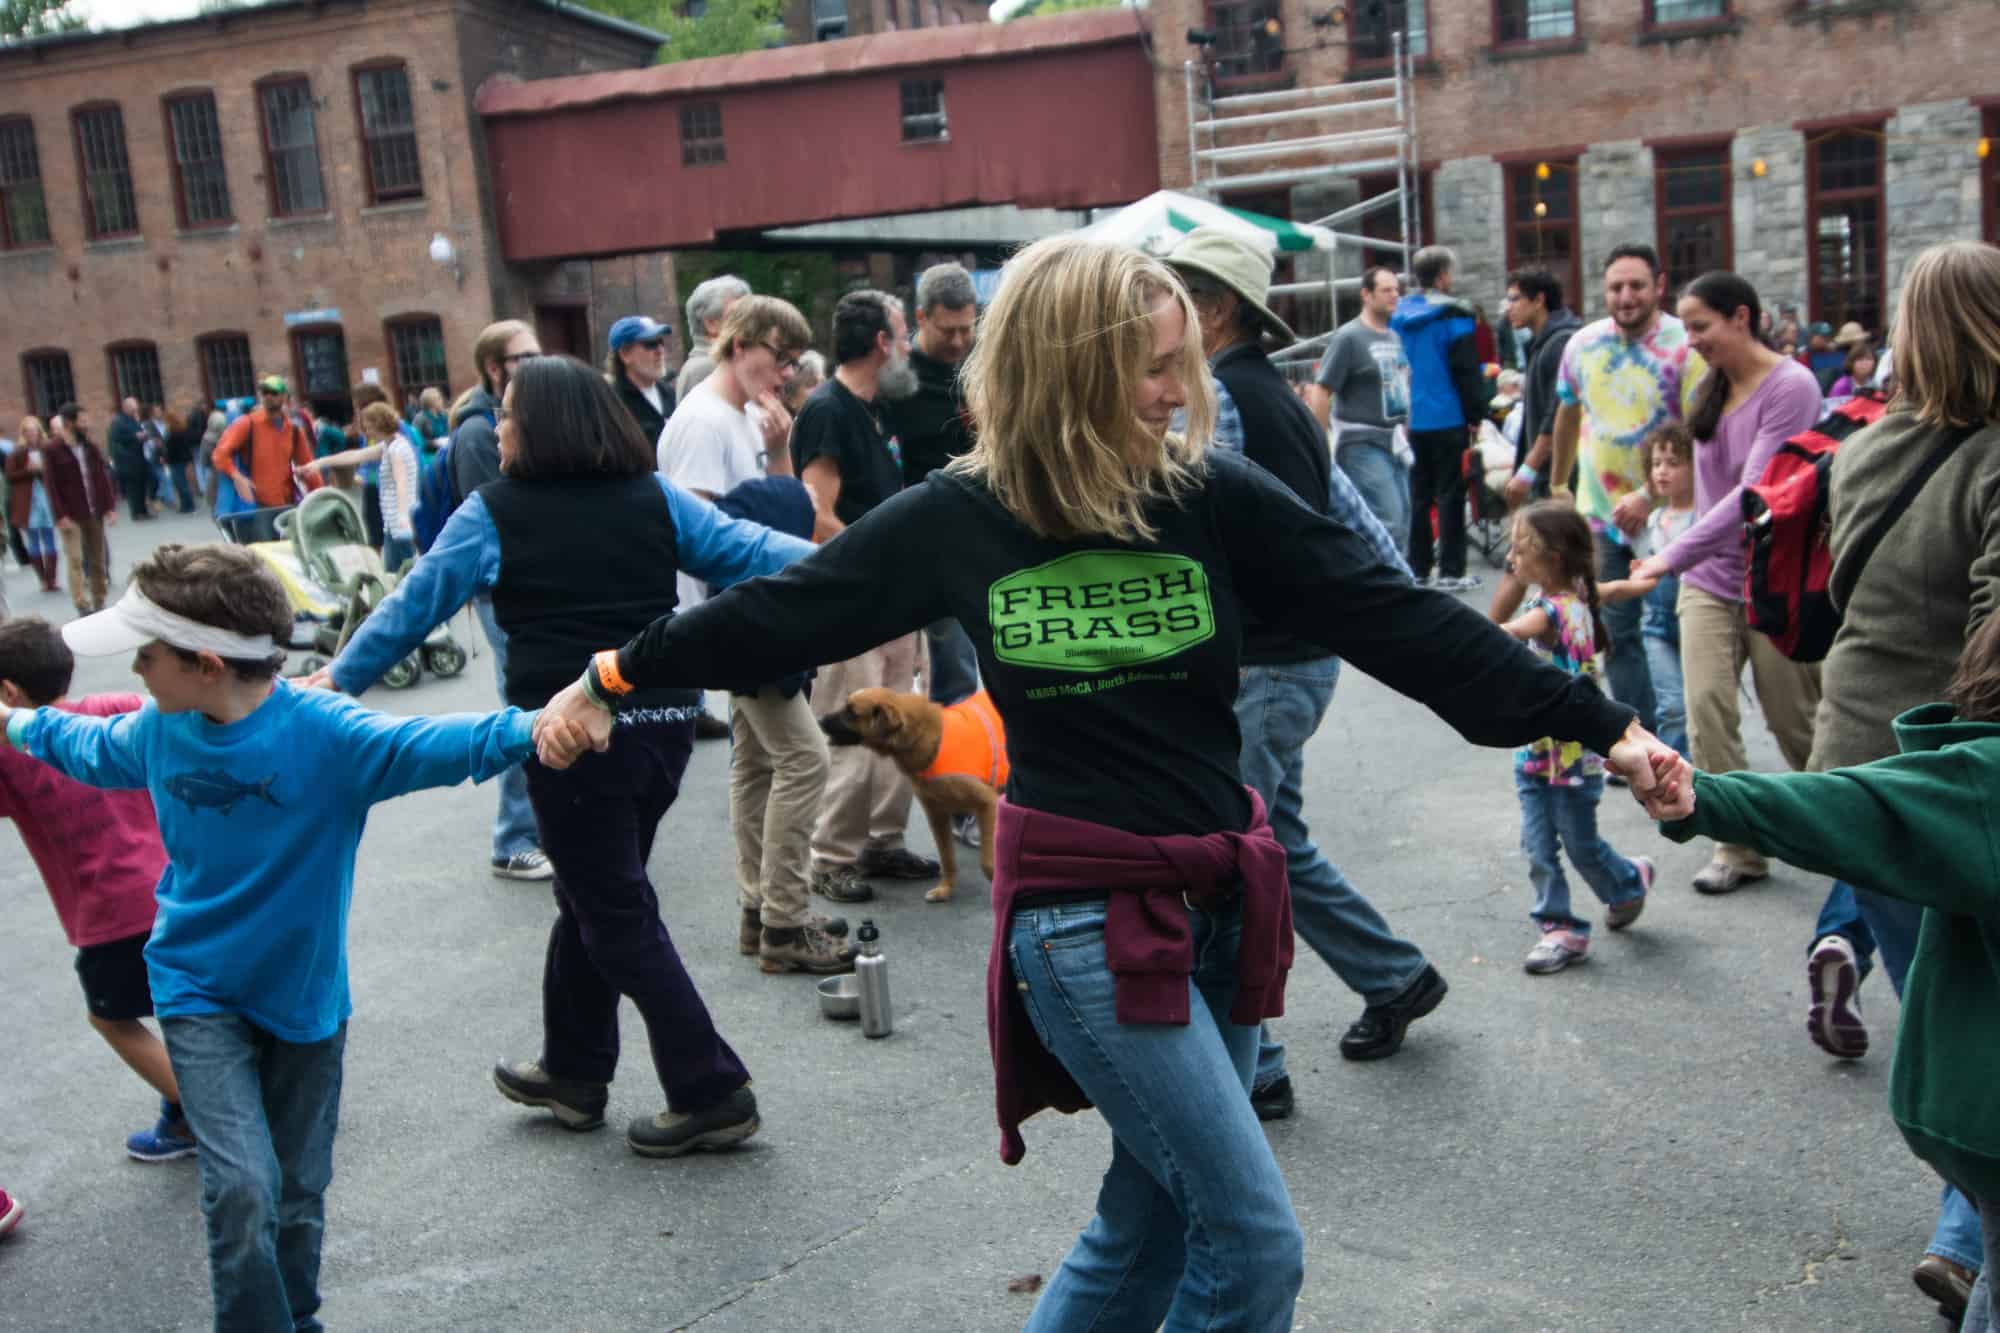 Live music gets listeners dancing at FreshGrass.